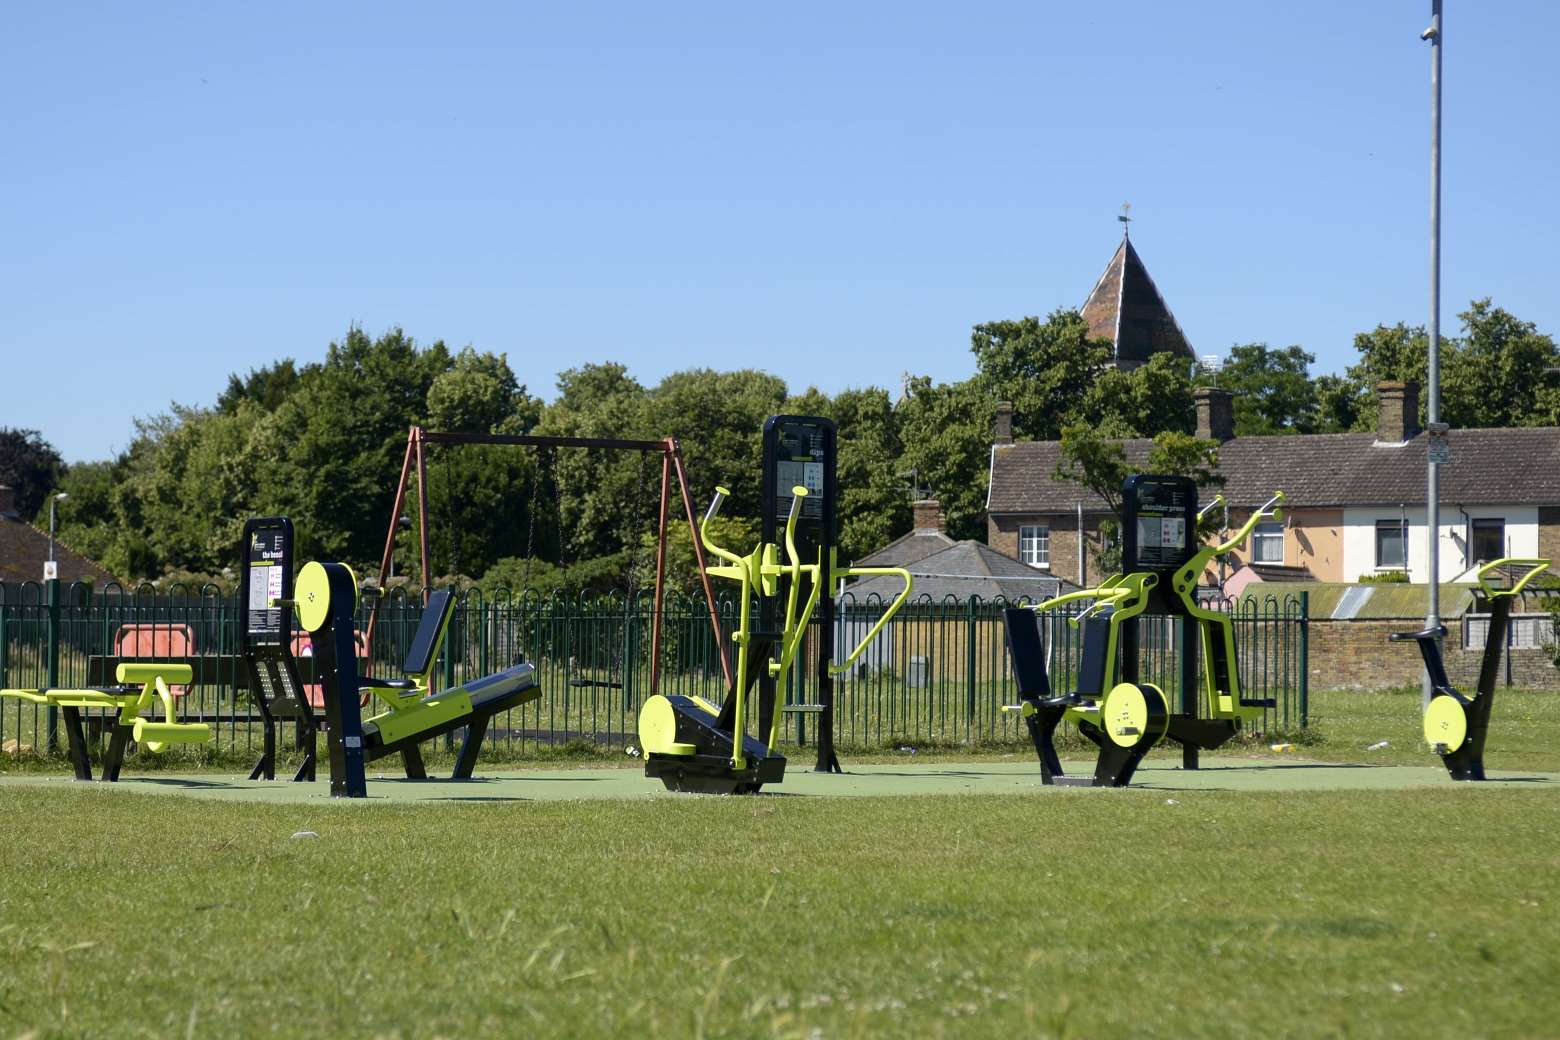 Faversham's first outdoor gym has been built and opened at Reedland Crescent park.